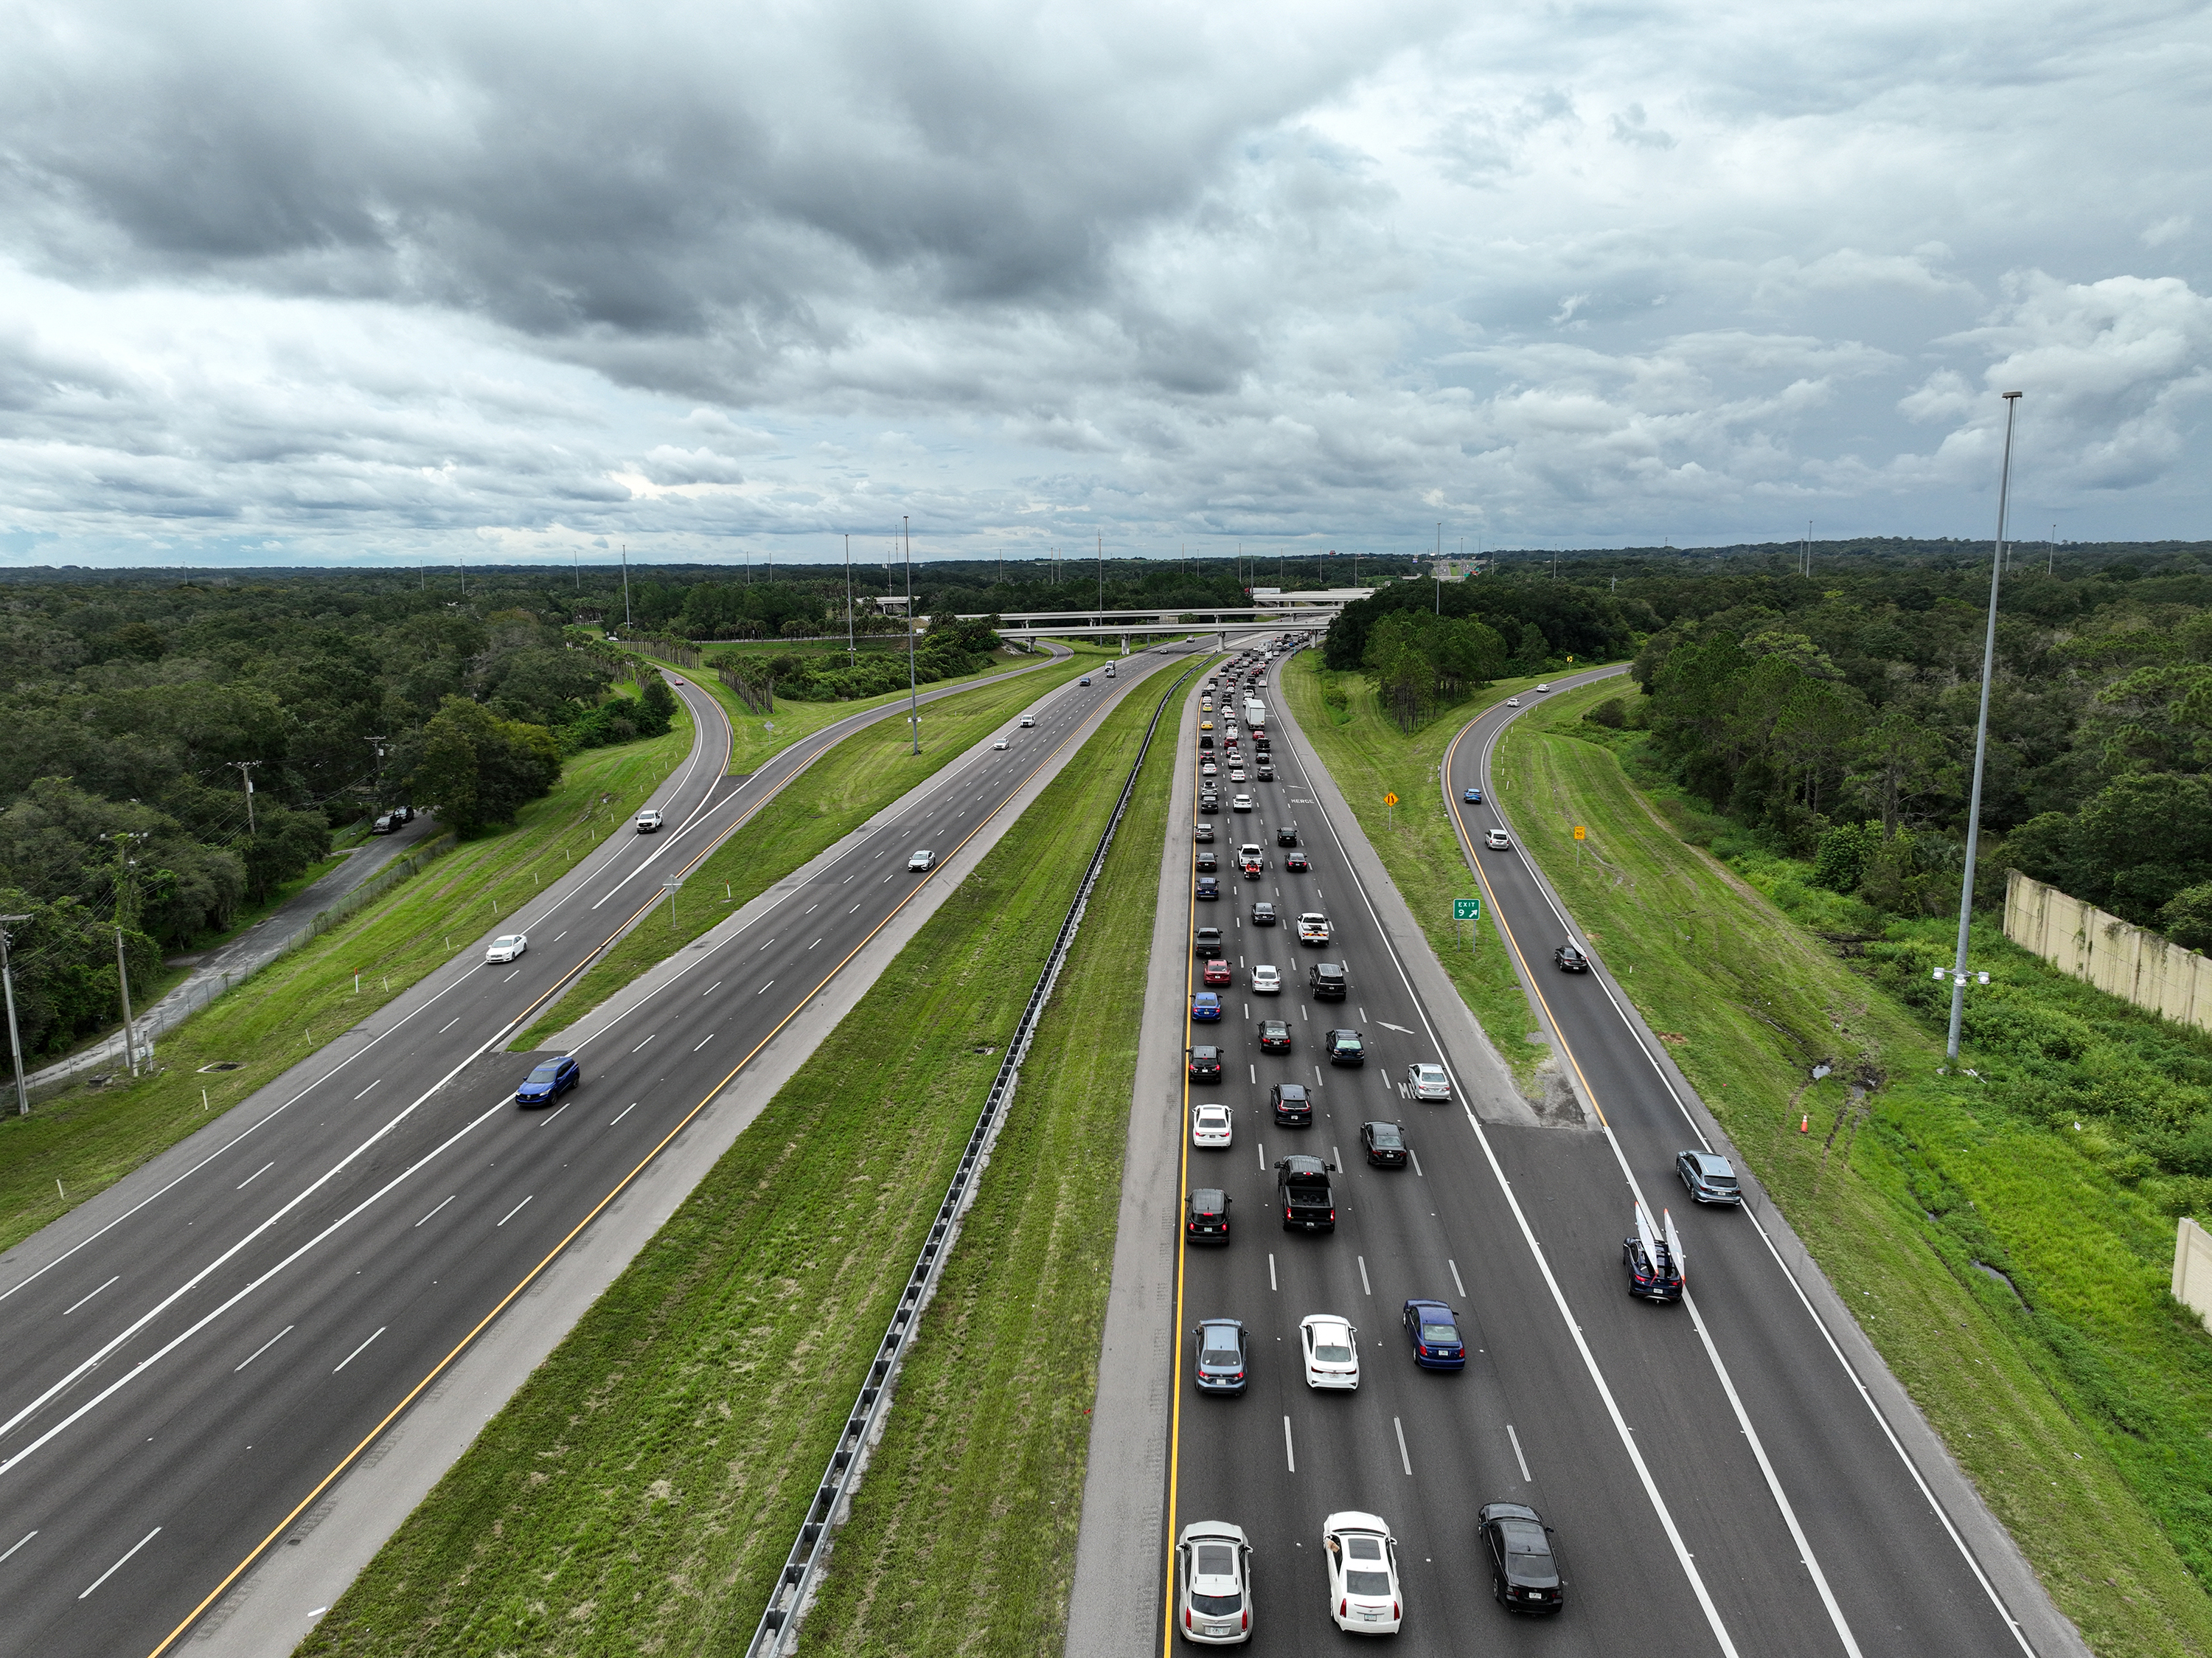 Tampa Bay area residents and drivers fill the lanes on I-4 as they escape the high winds and flood waters of Hurricane Ian with just a day left before the storm lands in Tampa, Florida on Tuesday.